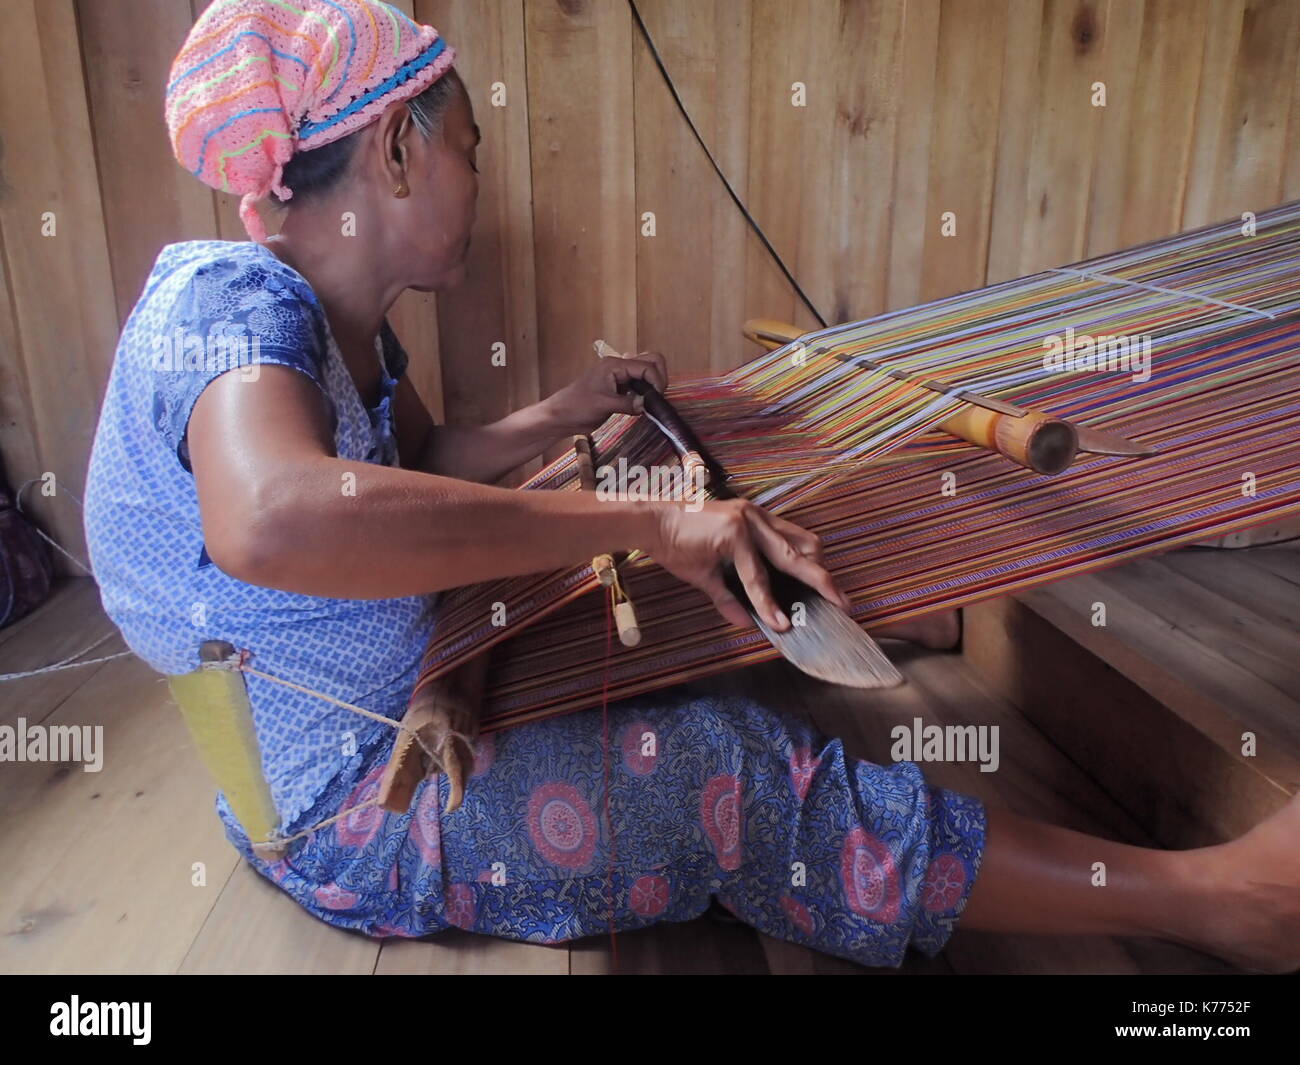 Lamitan City, Philippines. 14th Sep, 2017. The Yakan indigenous people of Lamitan, Basilan are known as intricate weavers of vibrant and colorful single handmade cloths. Jandina, a Yakan woman weaving a 21 meters long cloth. She's been doing this intricate job for more than 25 years. The Yakan indigenous people of Lamitan, Basilan are known as intricate weavers of vibrant and colorful single handmade cloths. Credit: Sherbien Dacalanio/Pacific Press/Alamy Live News Stock Photo